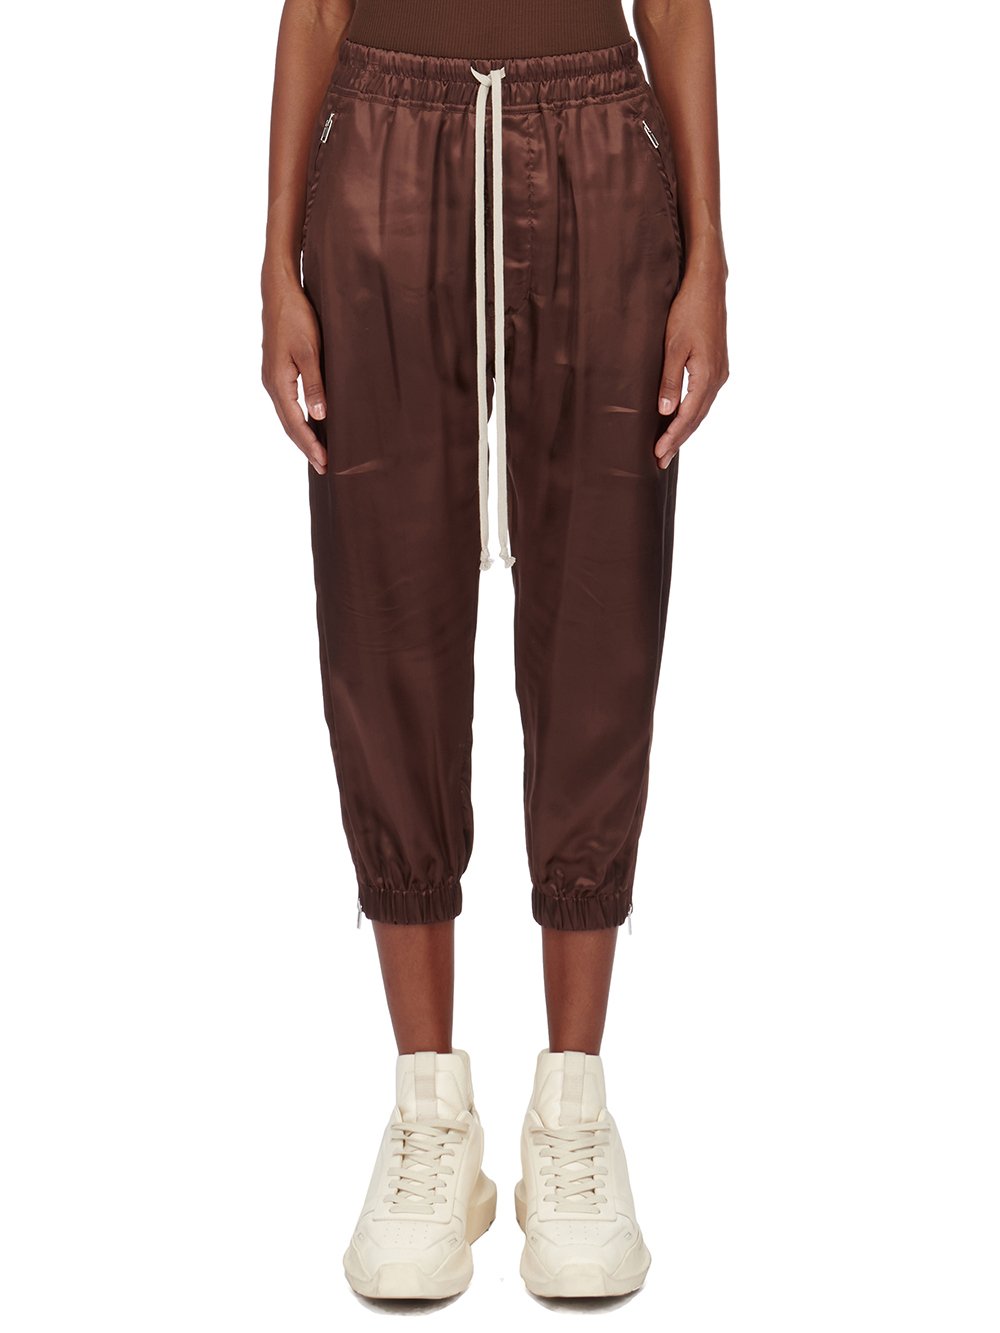 RICK OWENS FW23 LUXOR CROPPED TRACK IN BROWN CUPRO SATIN